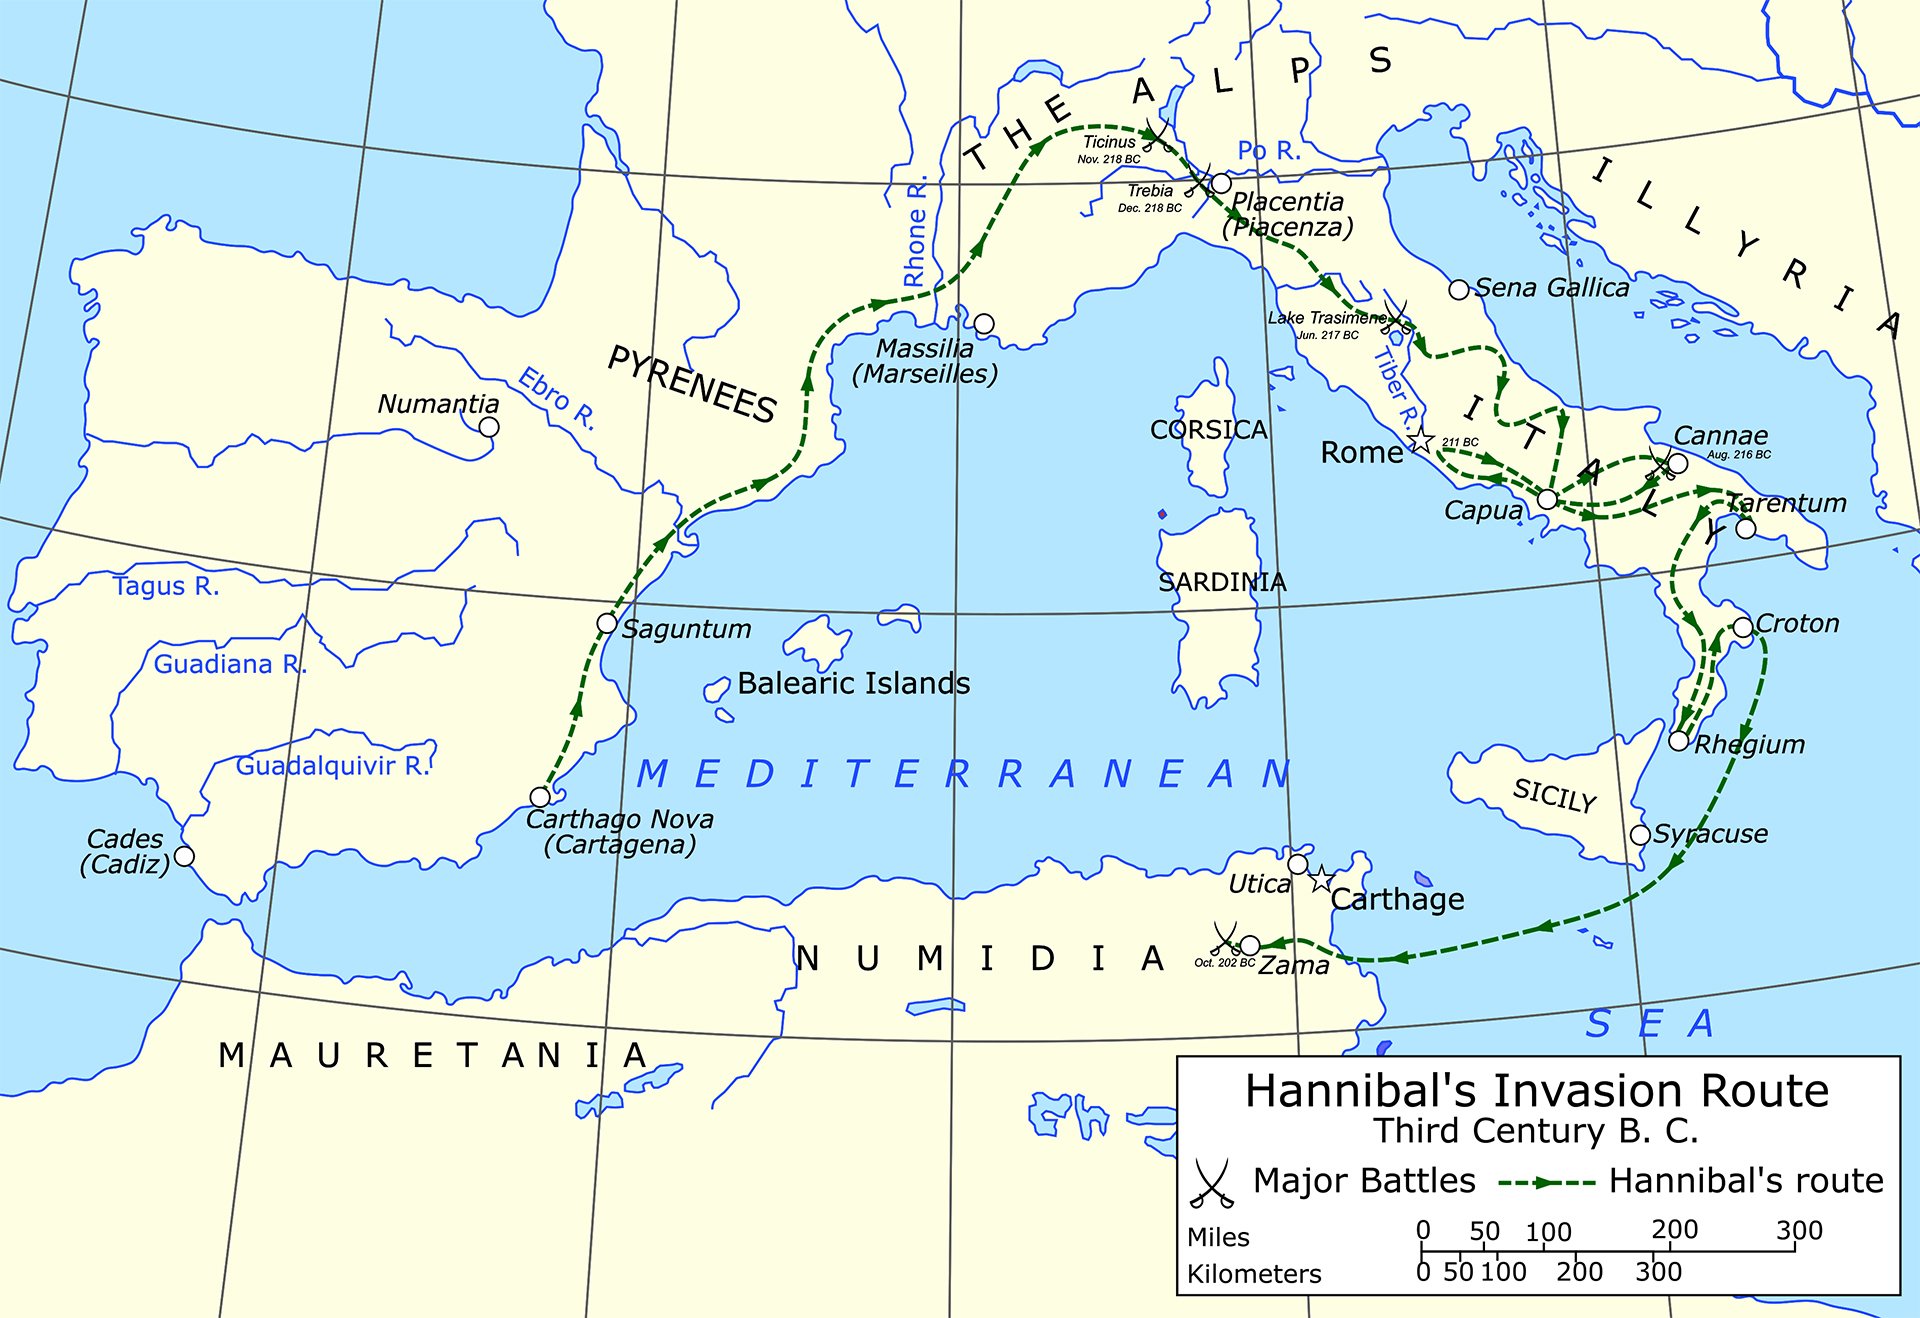 Map illustrating Hannibal's invasion route in the Third Century B.C. across the Mediterranean, Europe, and North Africa, with major battles marked along the way.